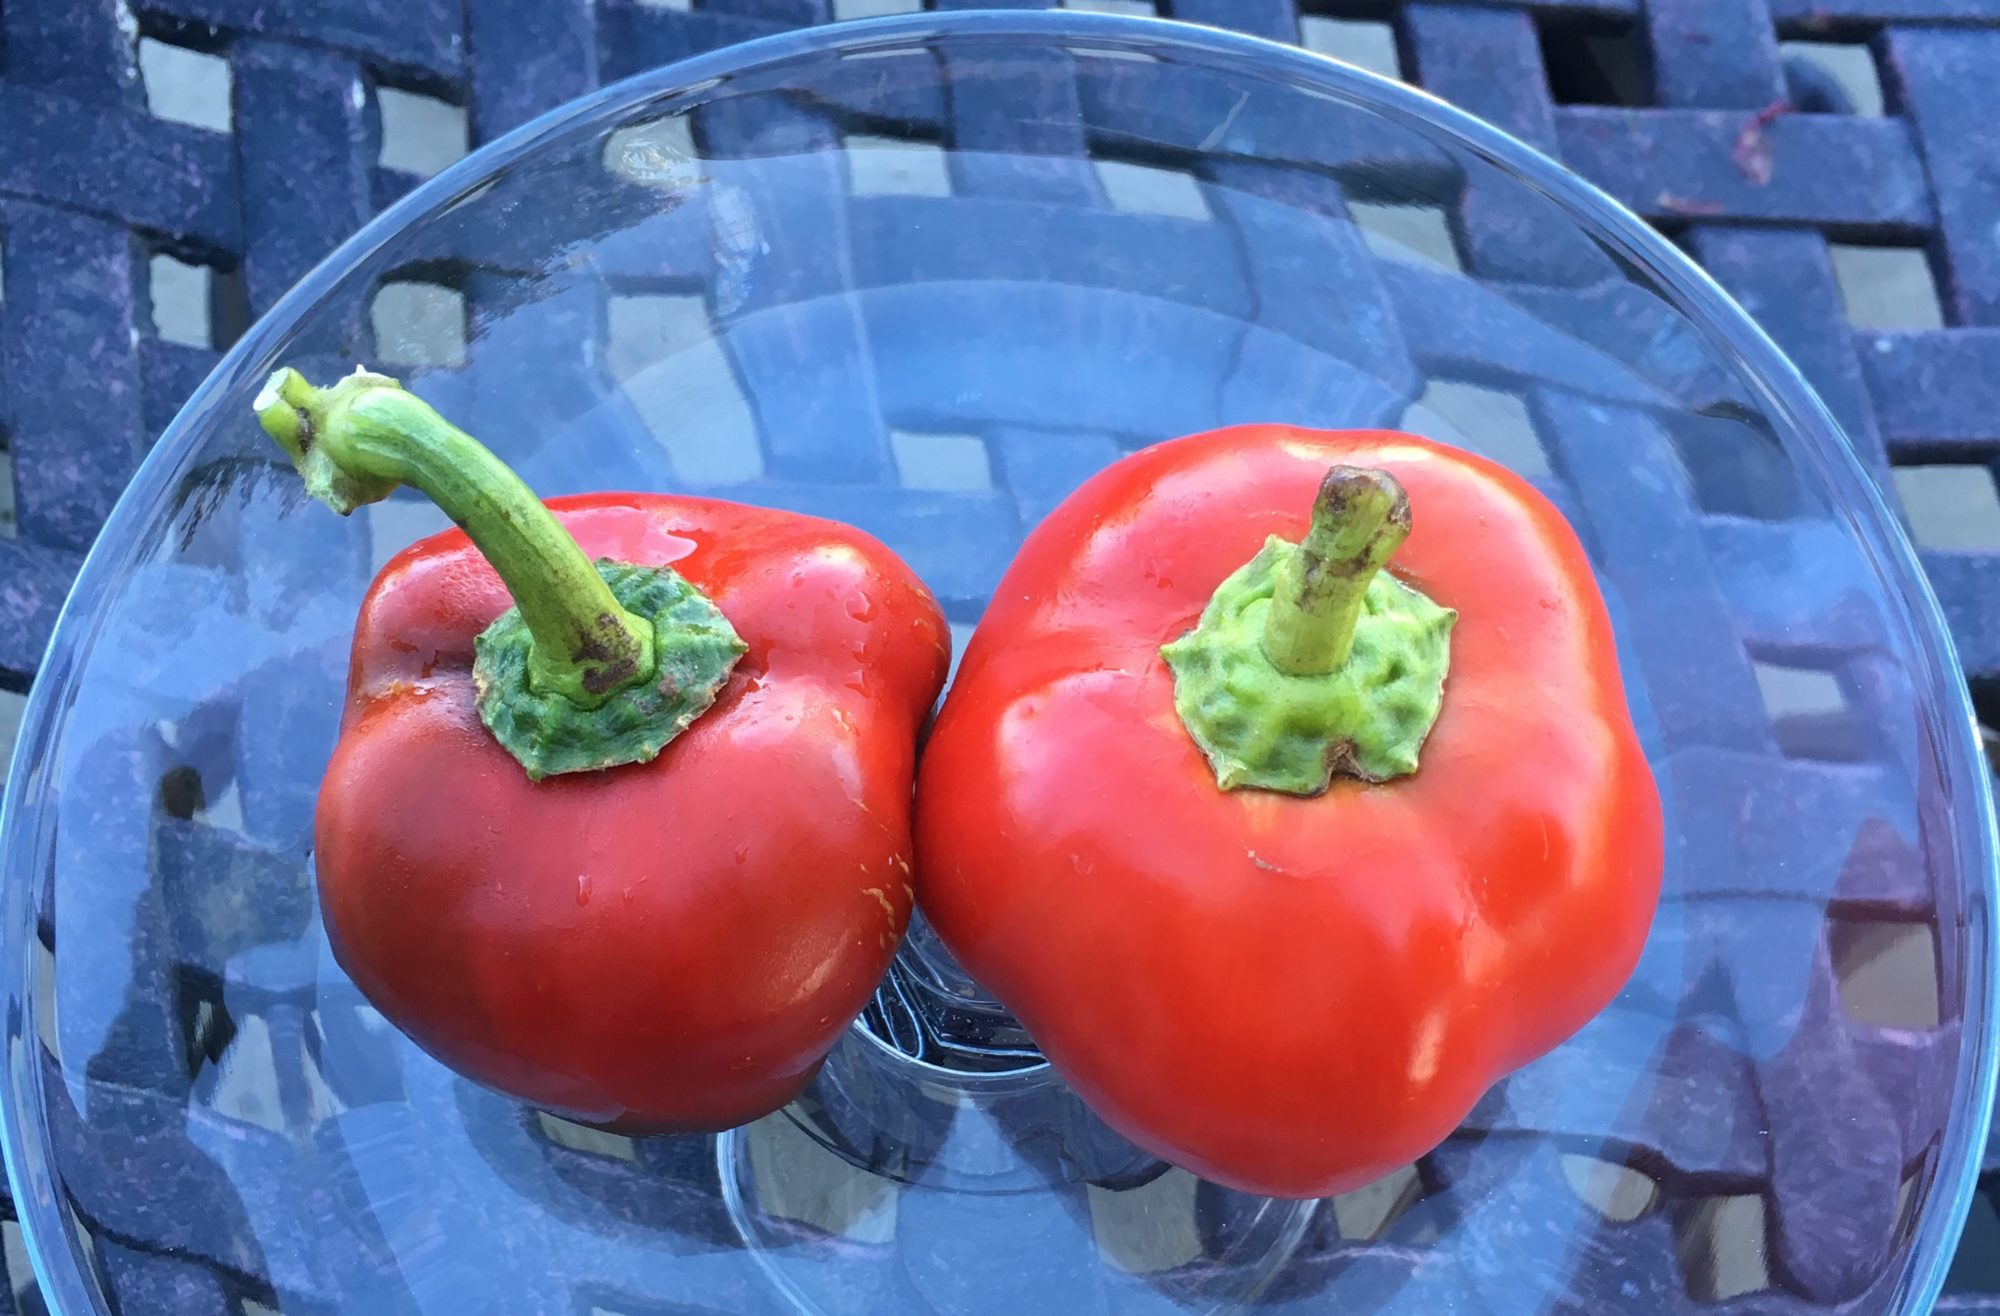 Smaller end of Season Quadrato d'Asti Rosso next to larger Gambo pepper - photo credit CElisabeth at 8th Deadly Sin ORG